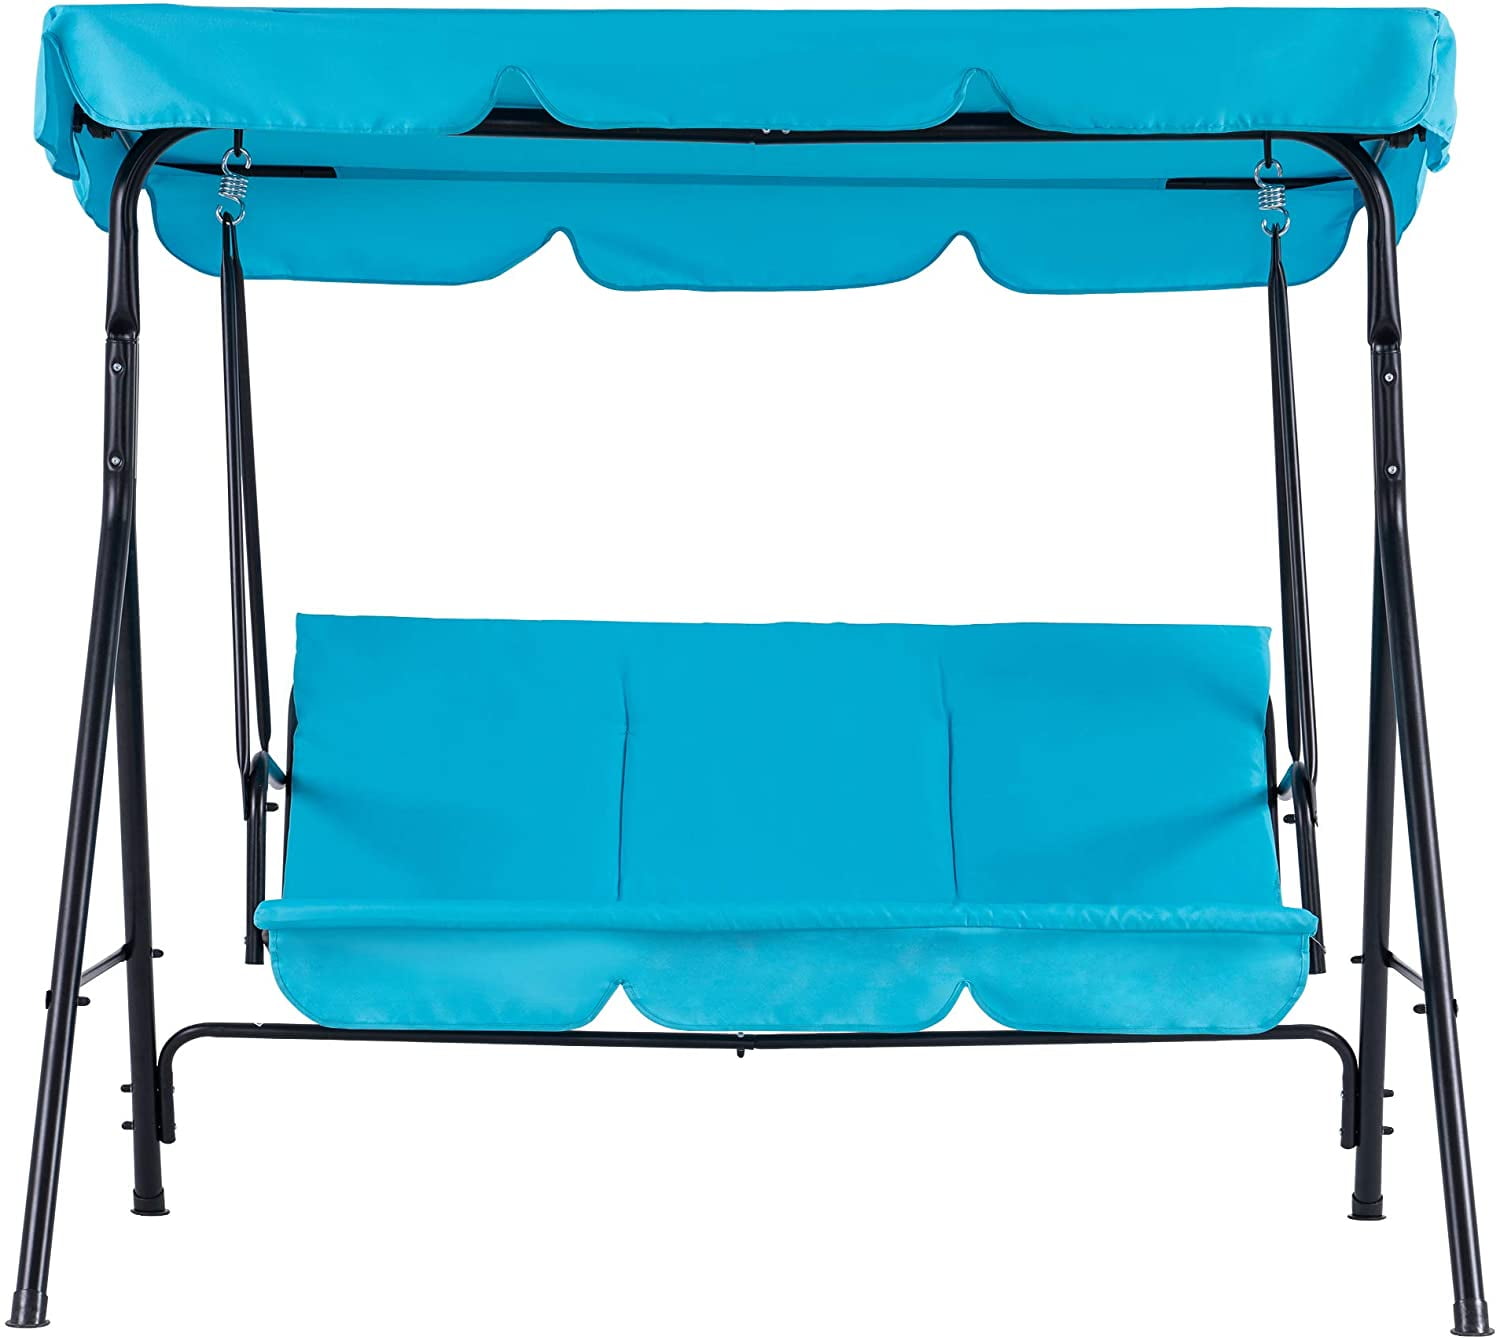 Mcombo 3-Person Outdoor Patio Swing Chair 4003 Turquoise Convertible Canopy Hanging Swing Glider Lounge Chair Removable Cushions 